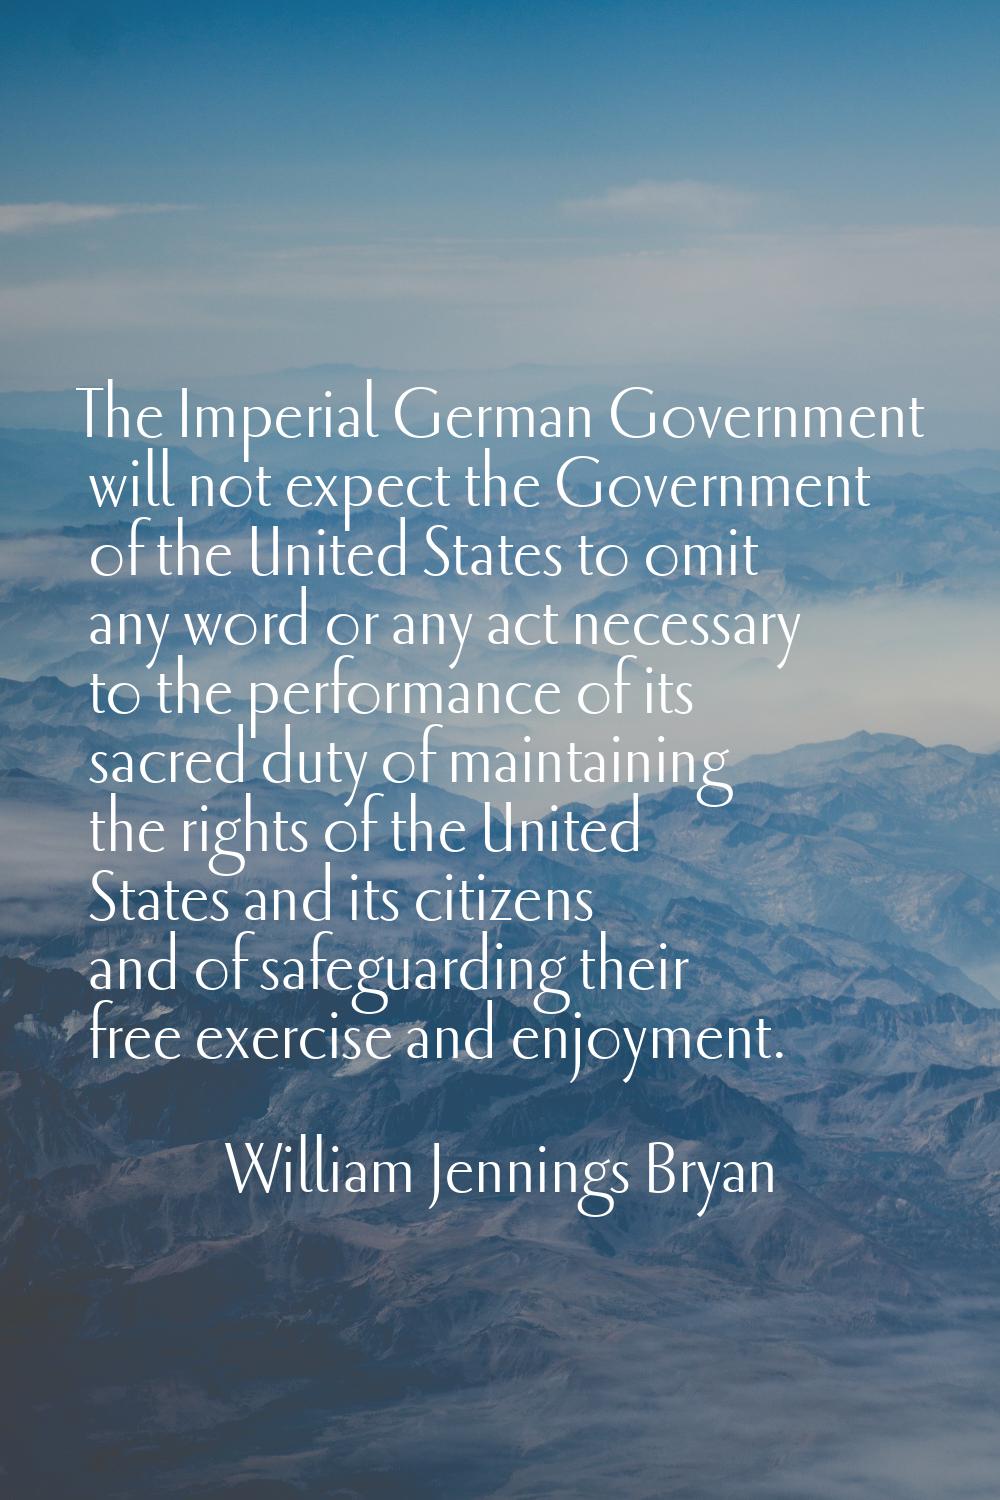 The Imperial German Government will not expect the Government of the United States to omit any word